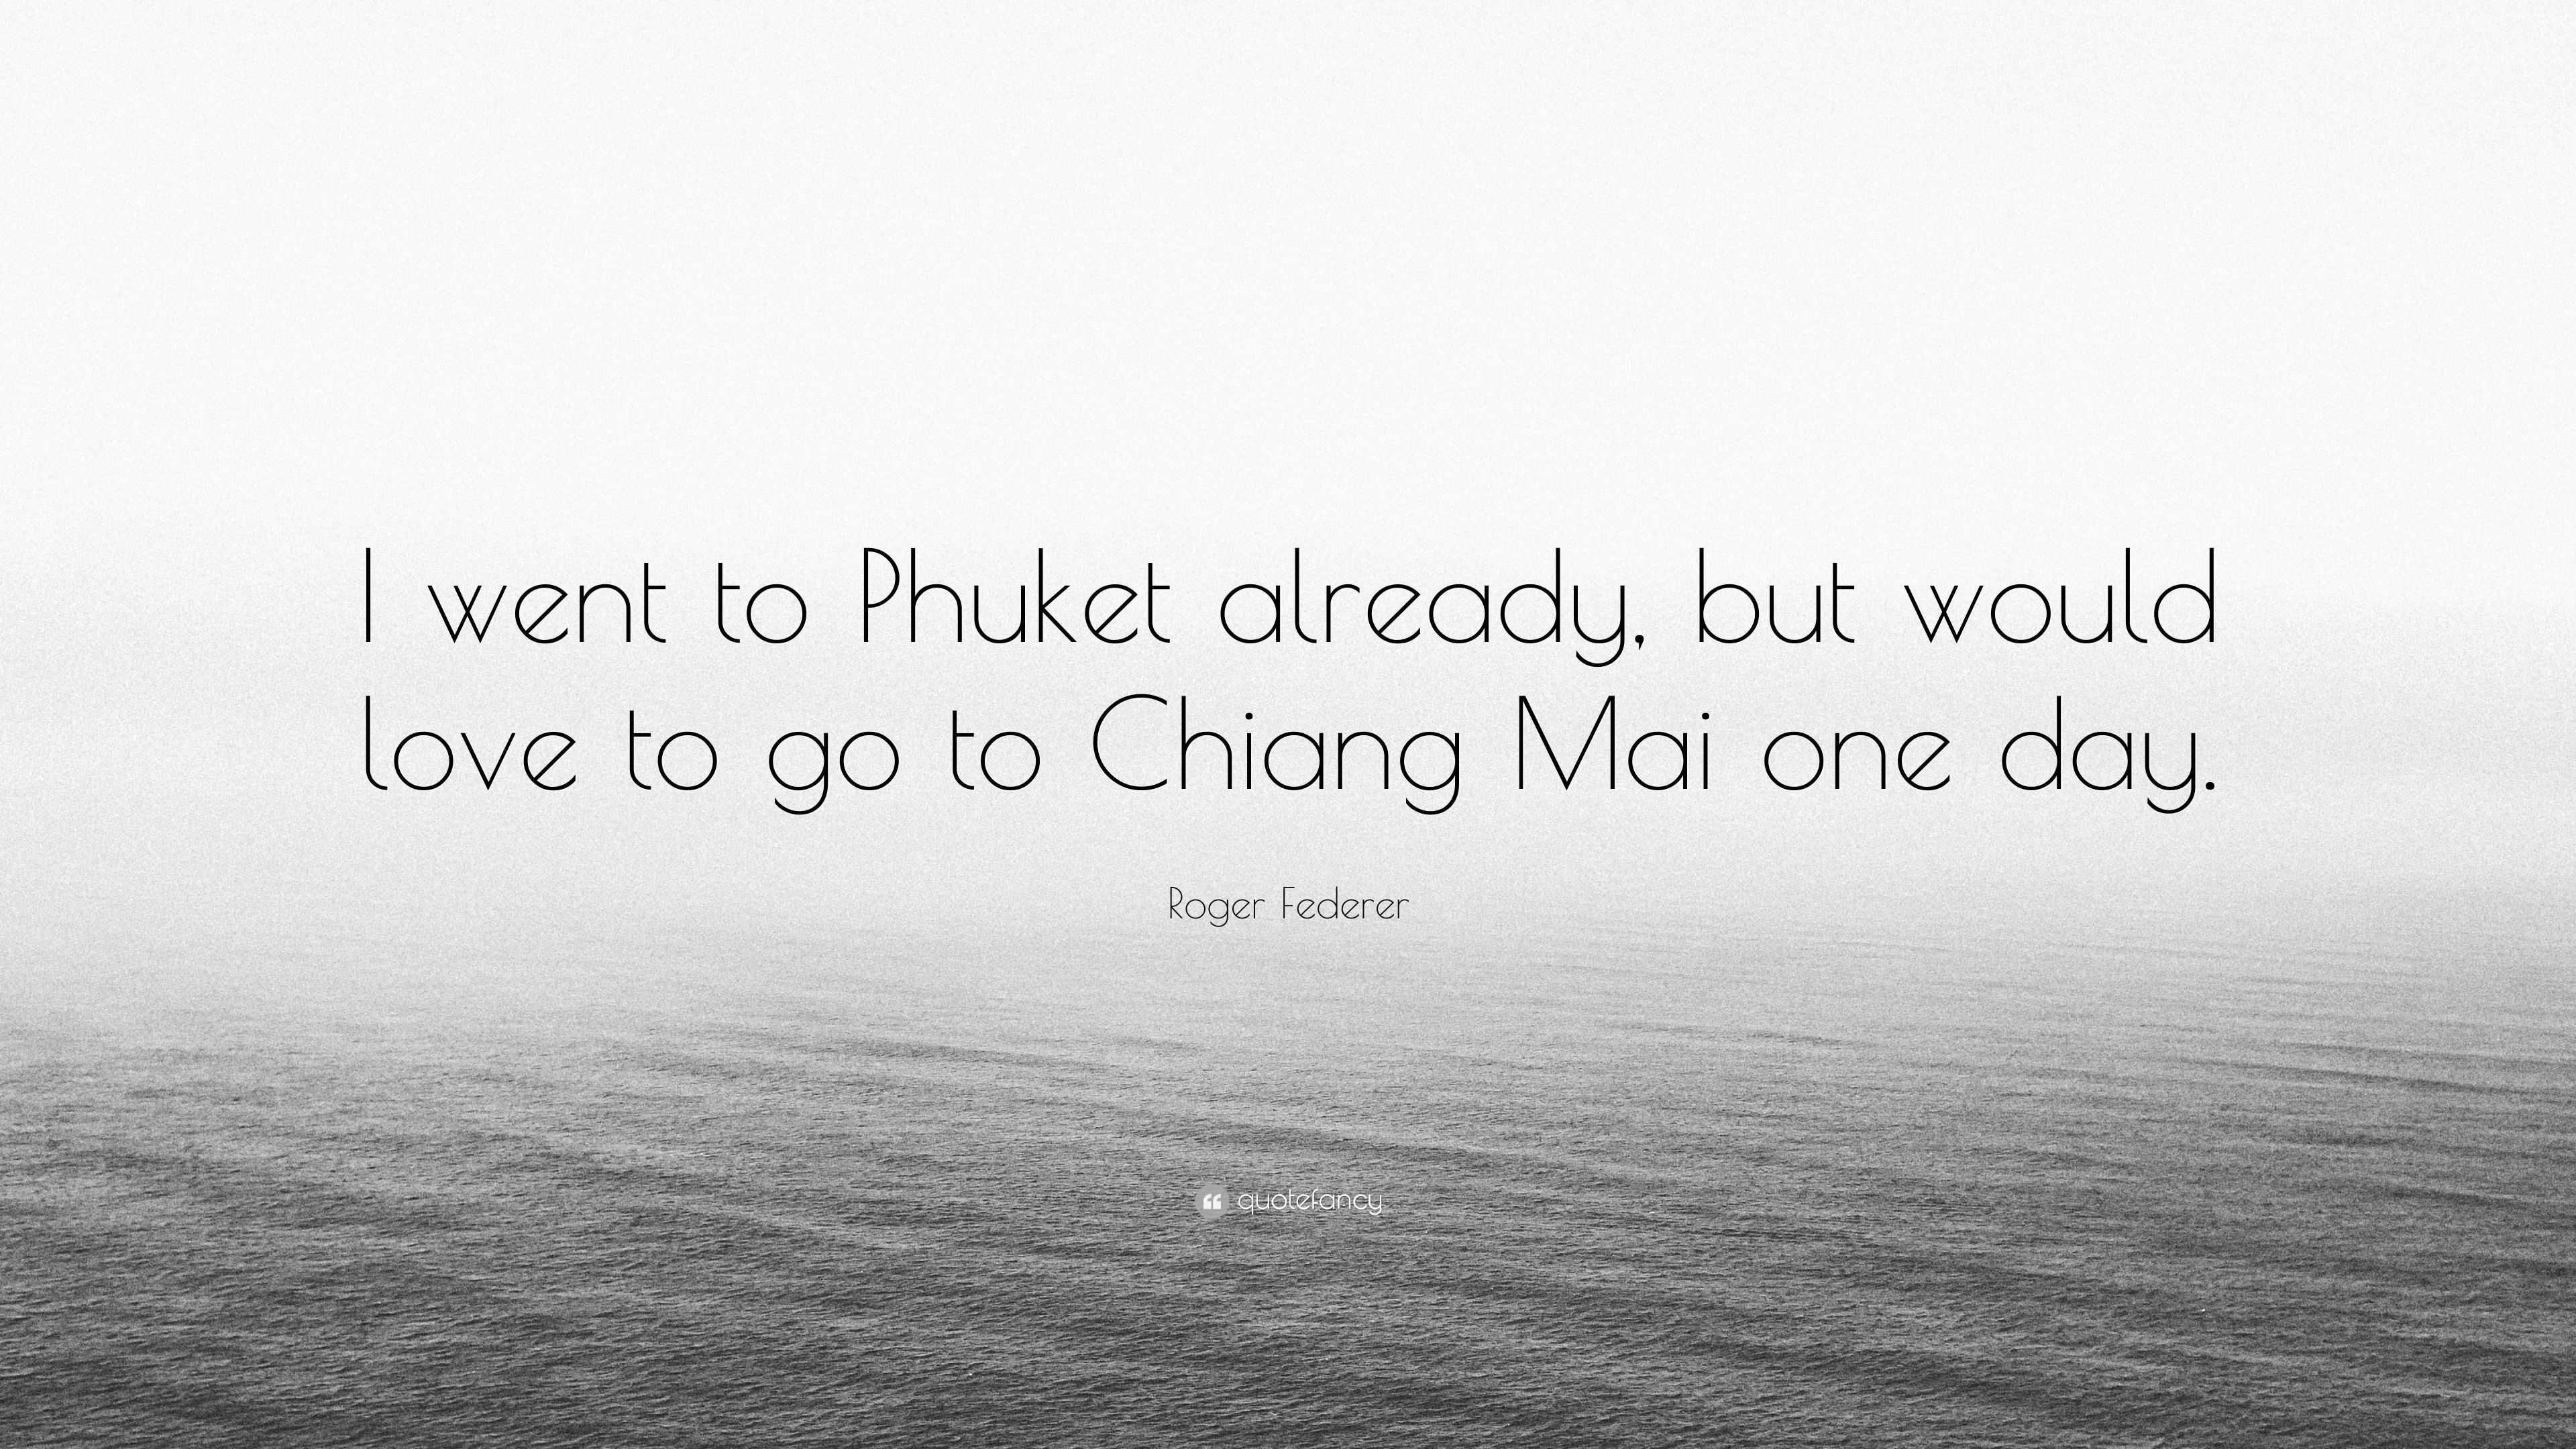 Roger Federer Quote: “I went to Phuket already, but would love to go to  Chiang Mai